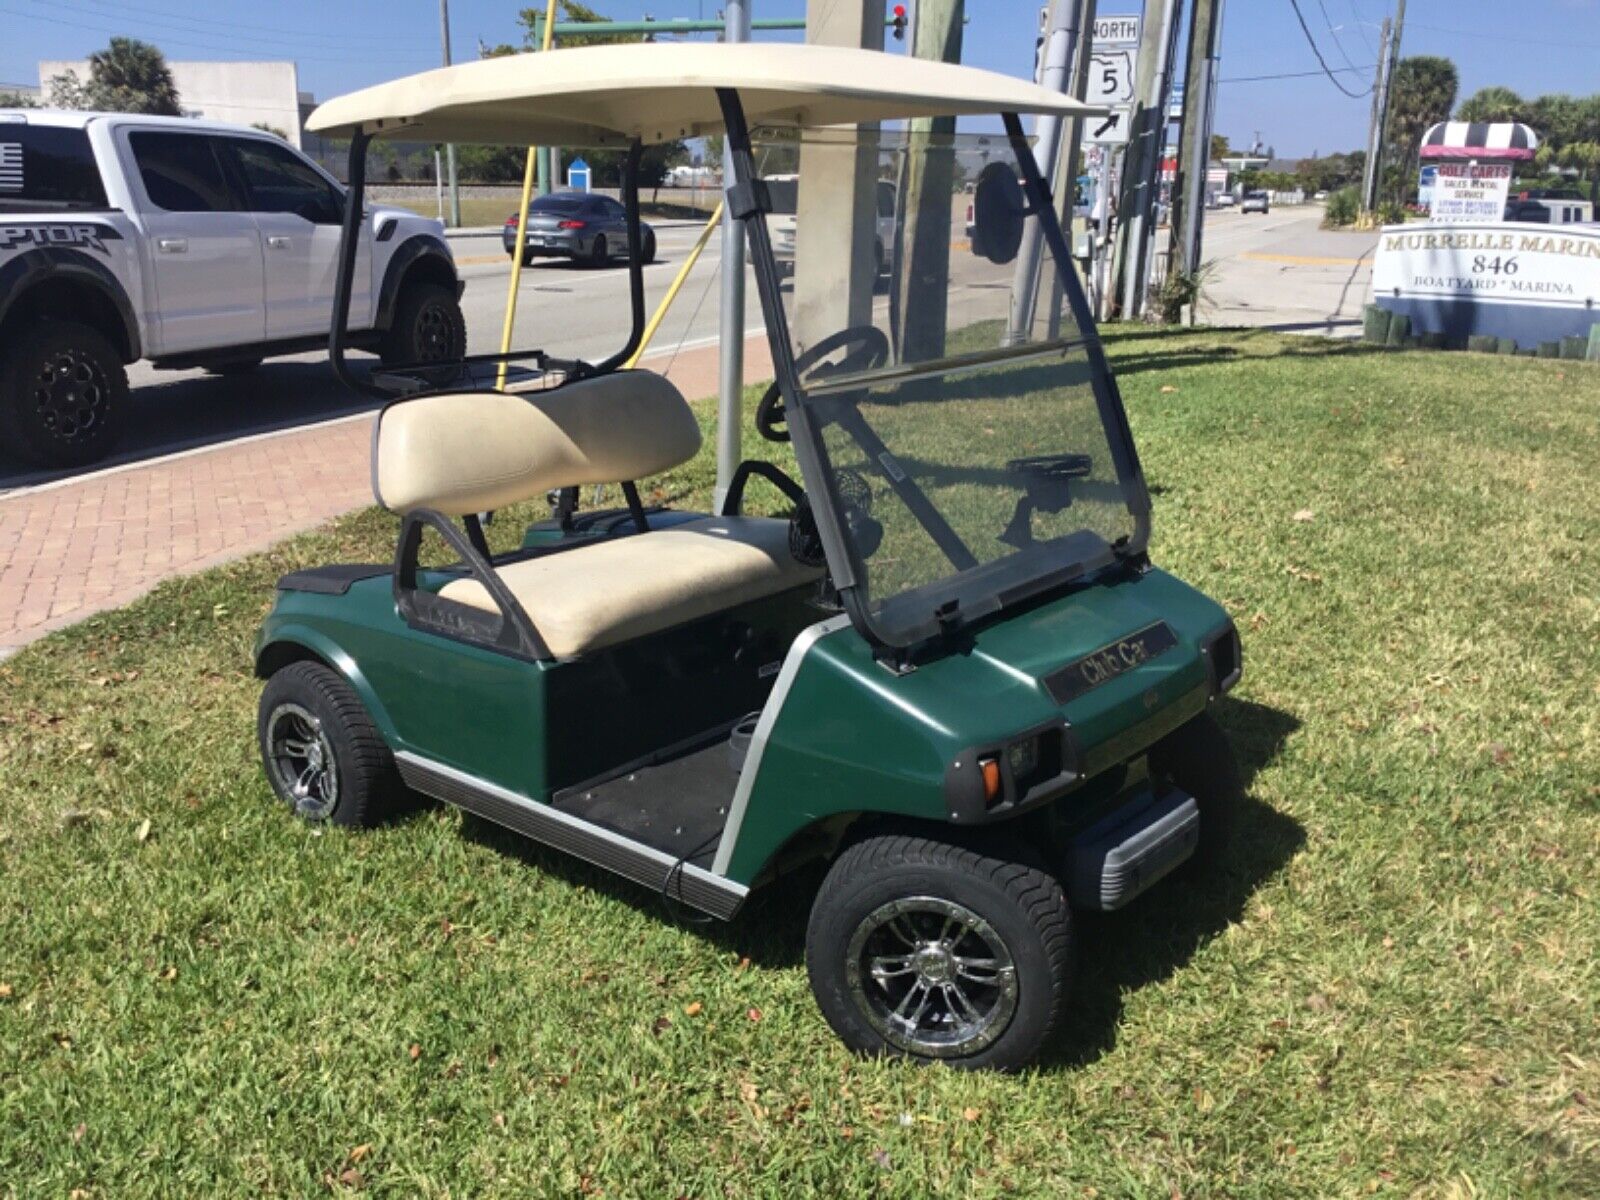 2003 green club car ds golf cart 36v with canopy lights charger